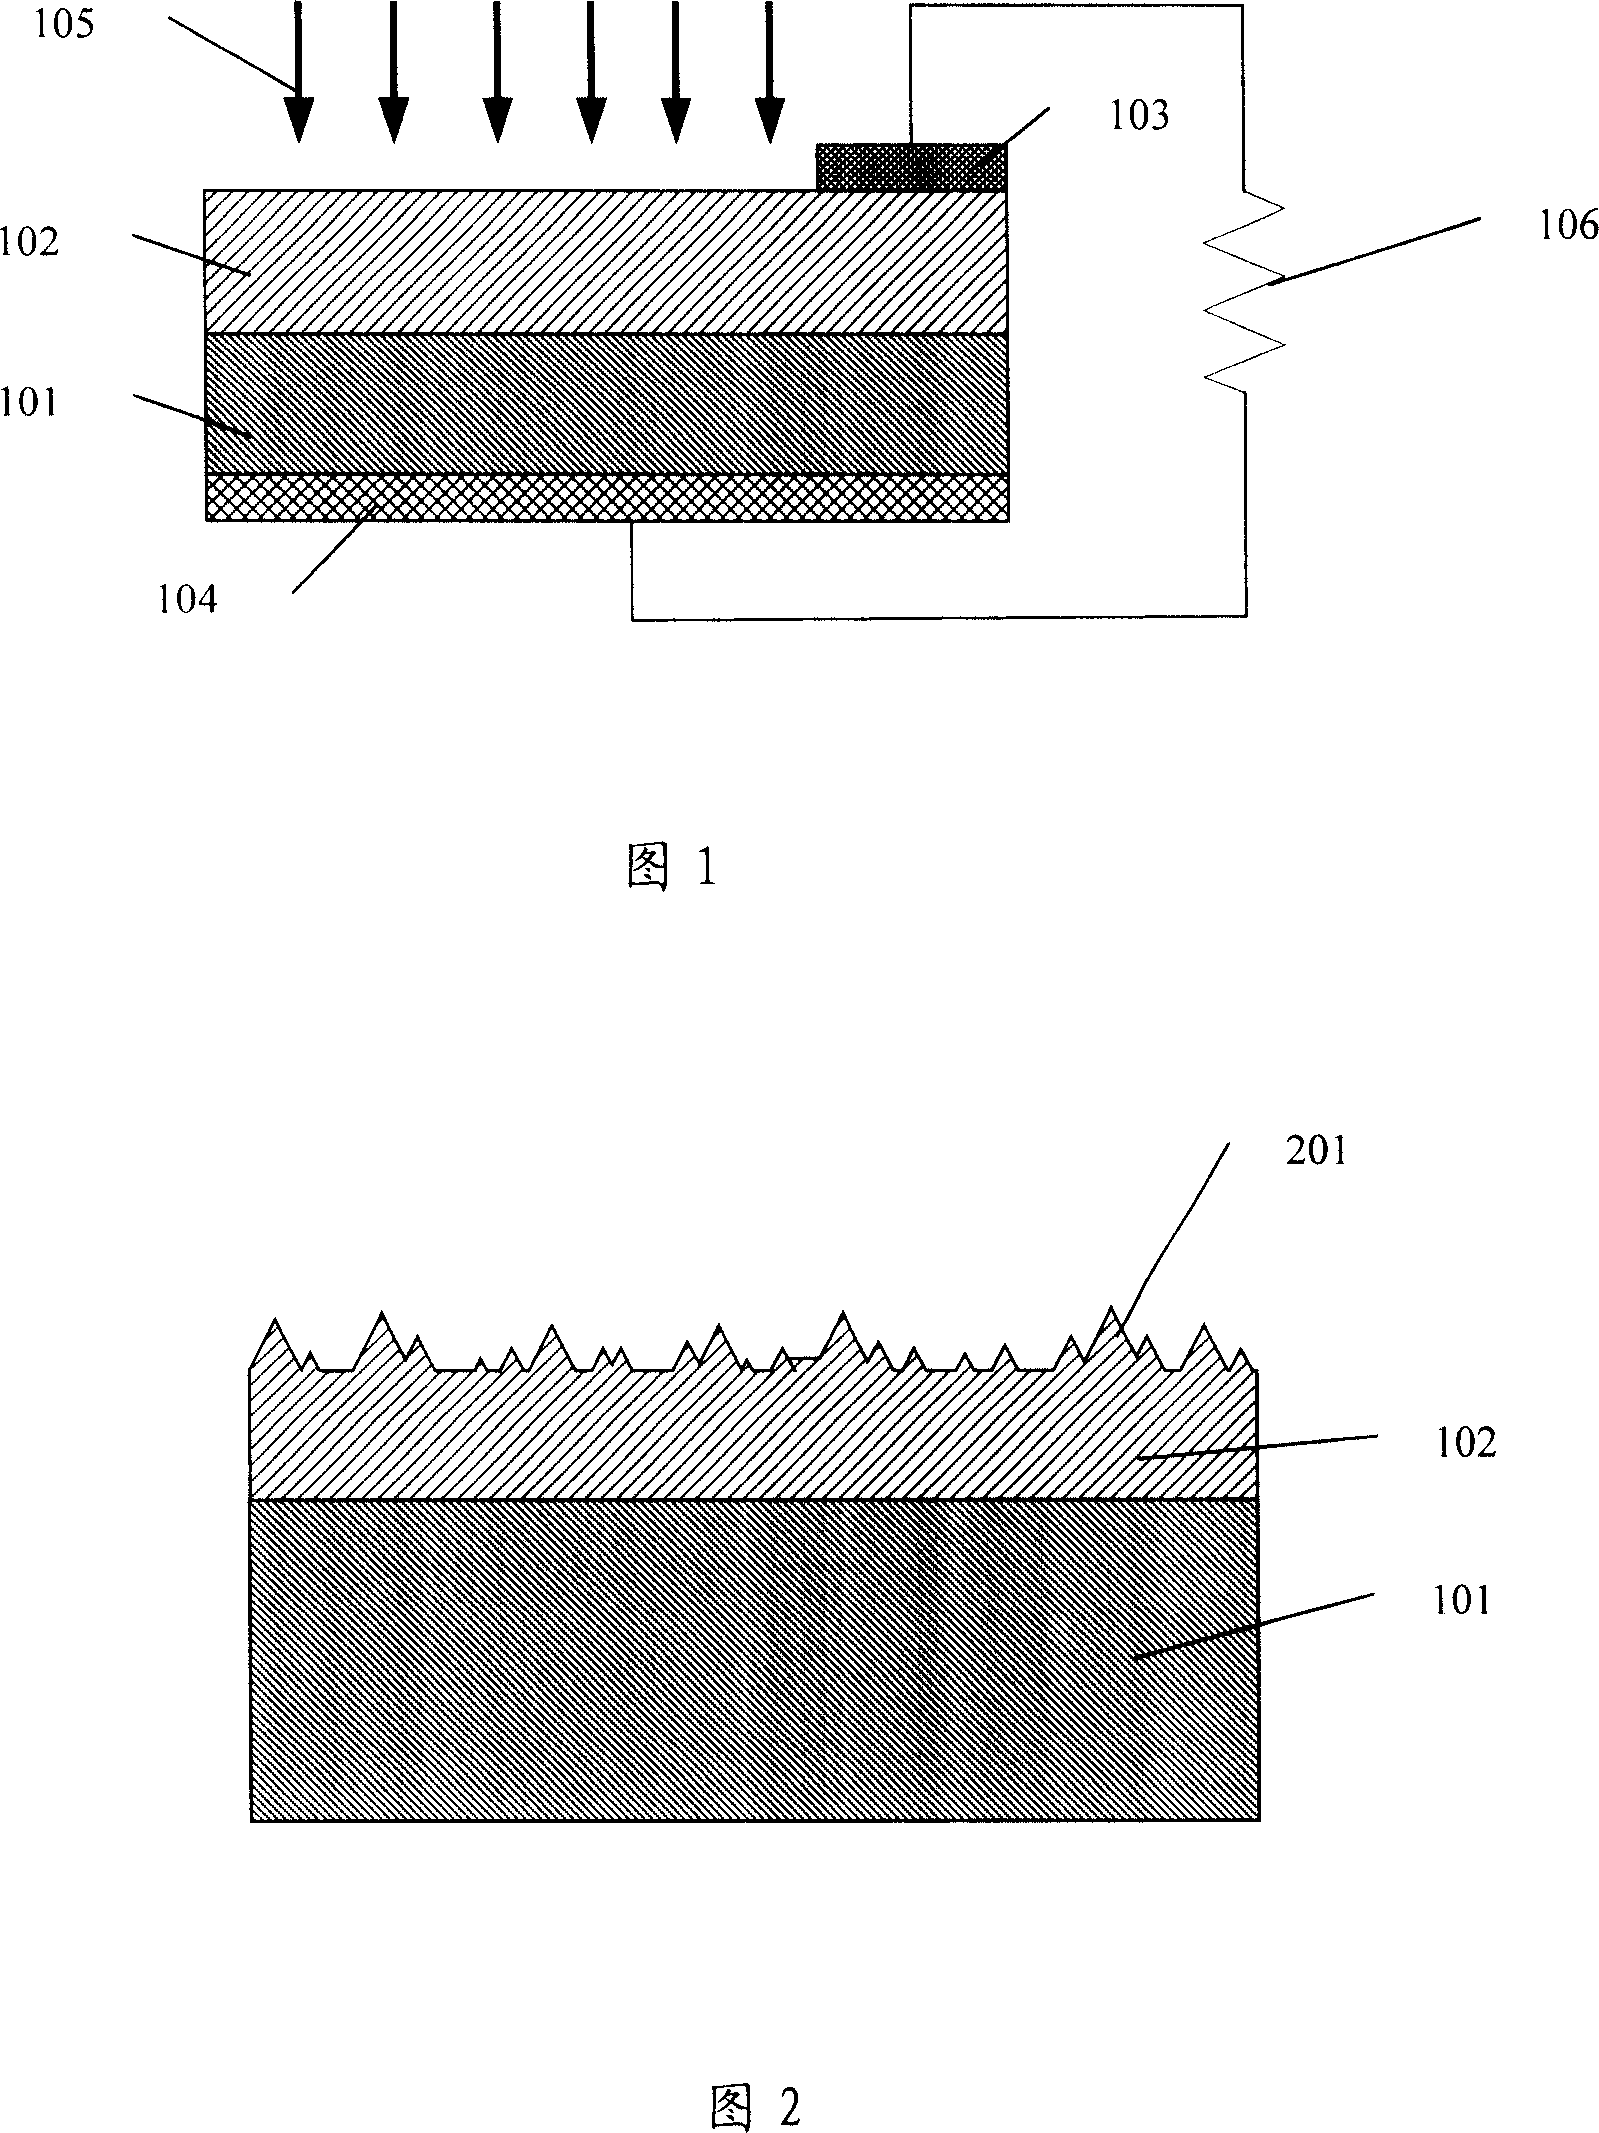 Processing method for silicon sheet surface